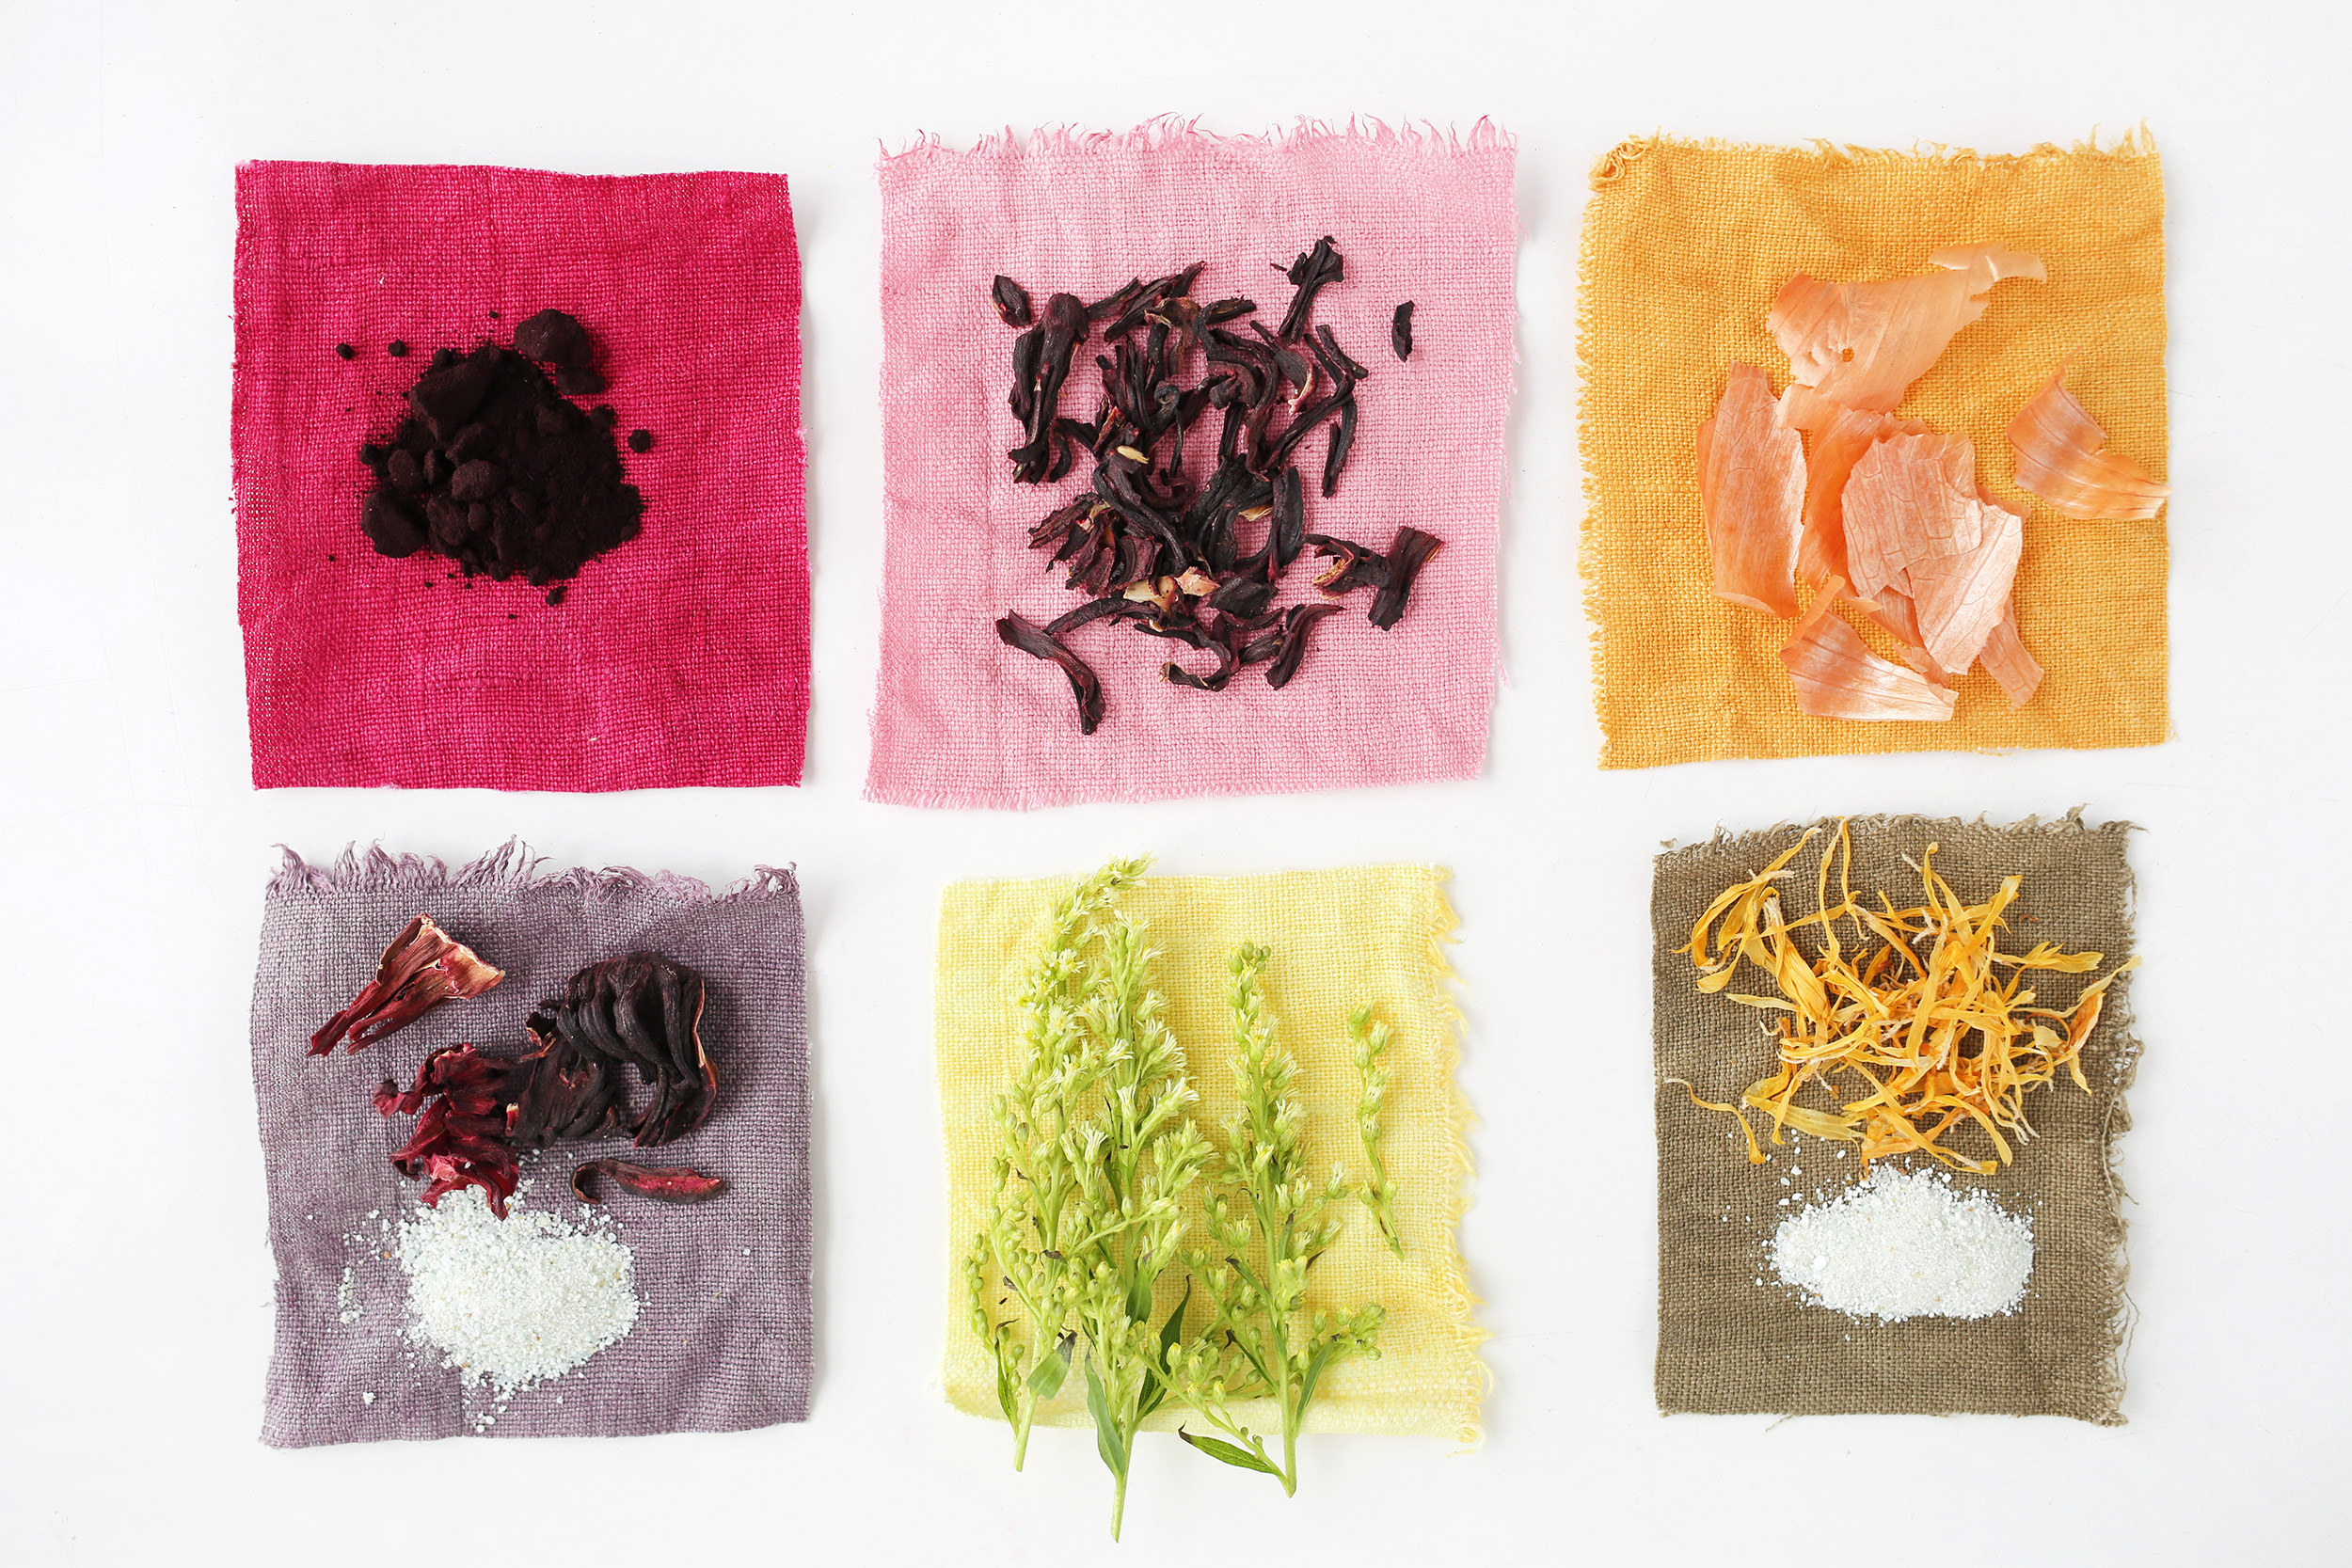 A color study with natural plant dyes